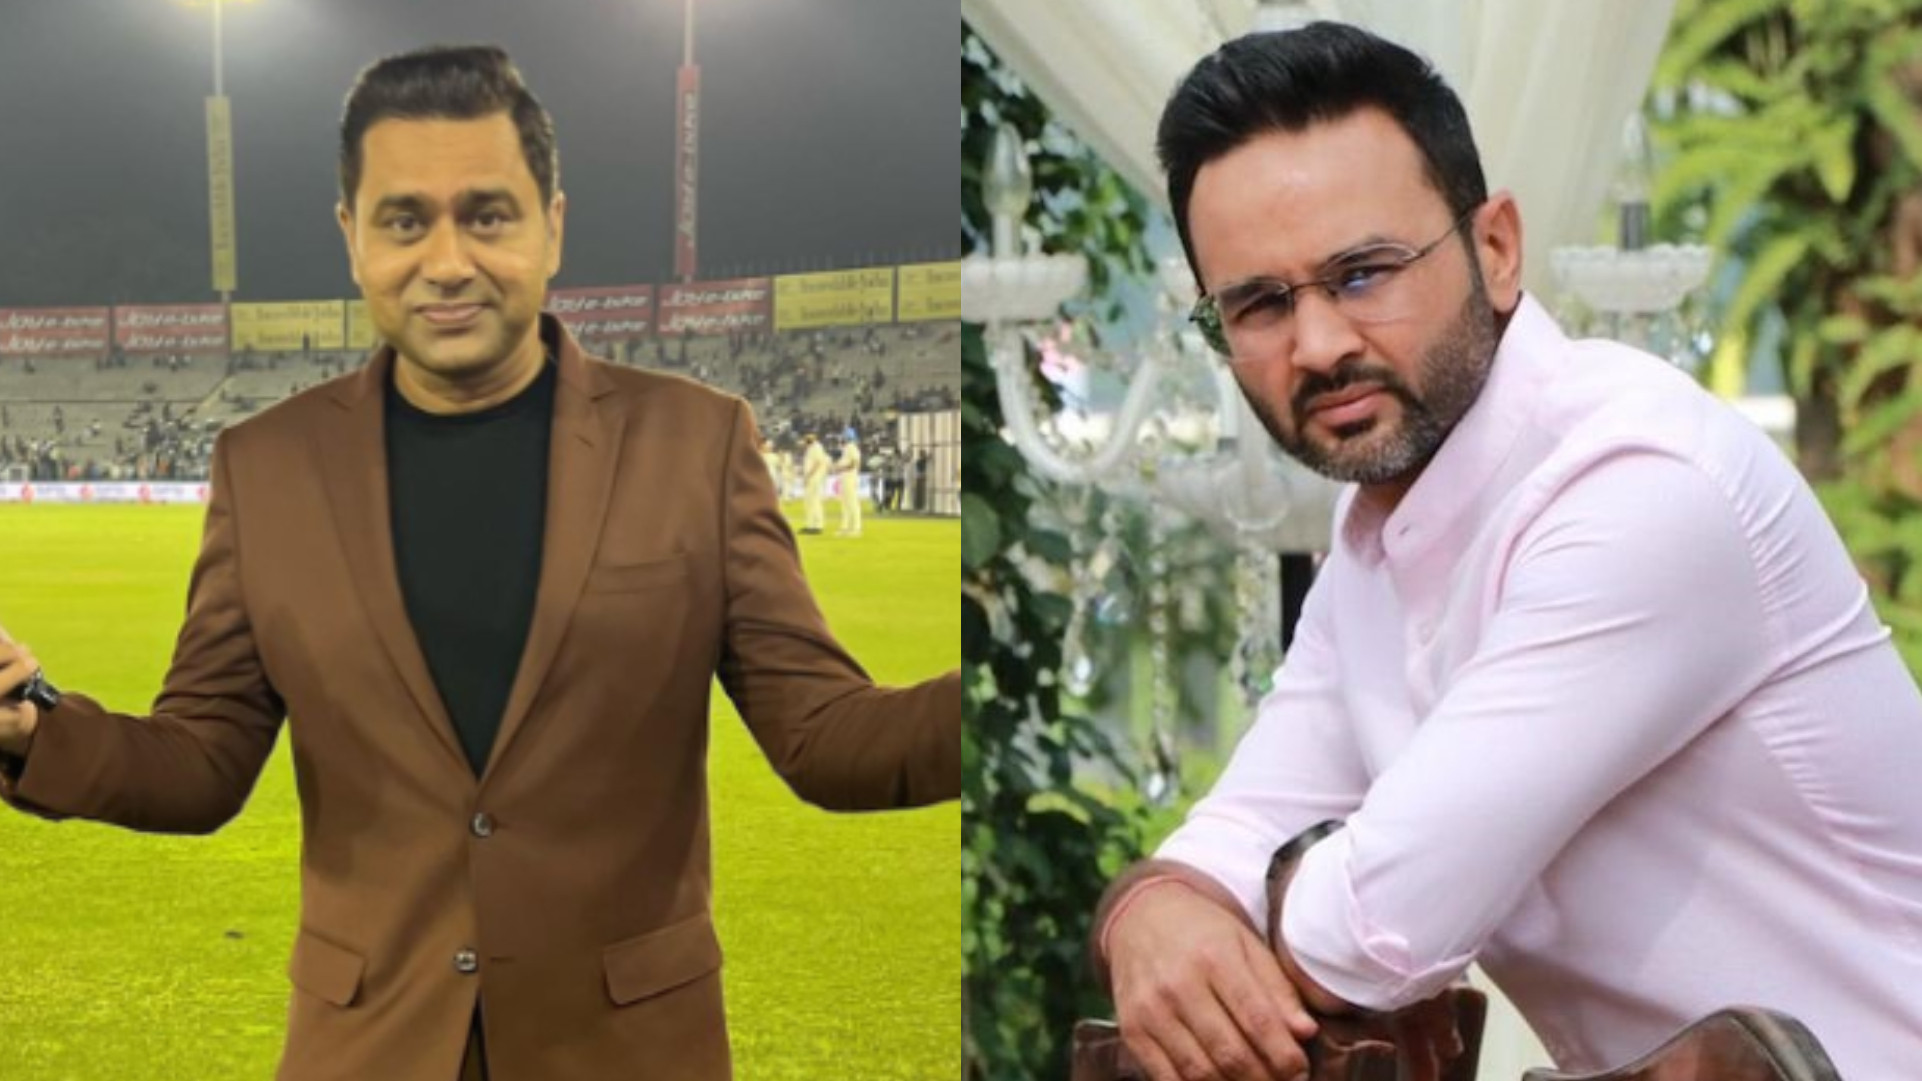 Fans ask Parthiv Patel and Aakash Chopra to apply for India selectors’ post; the duo politely refuse